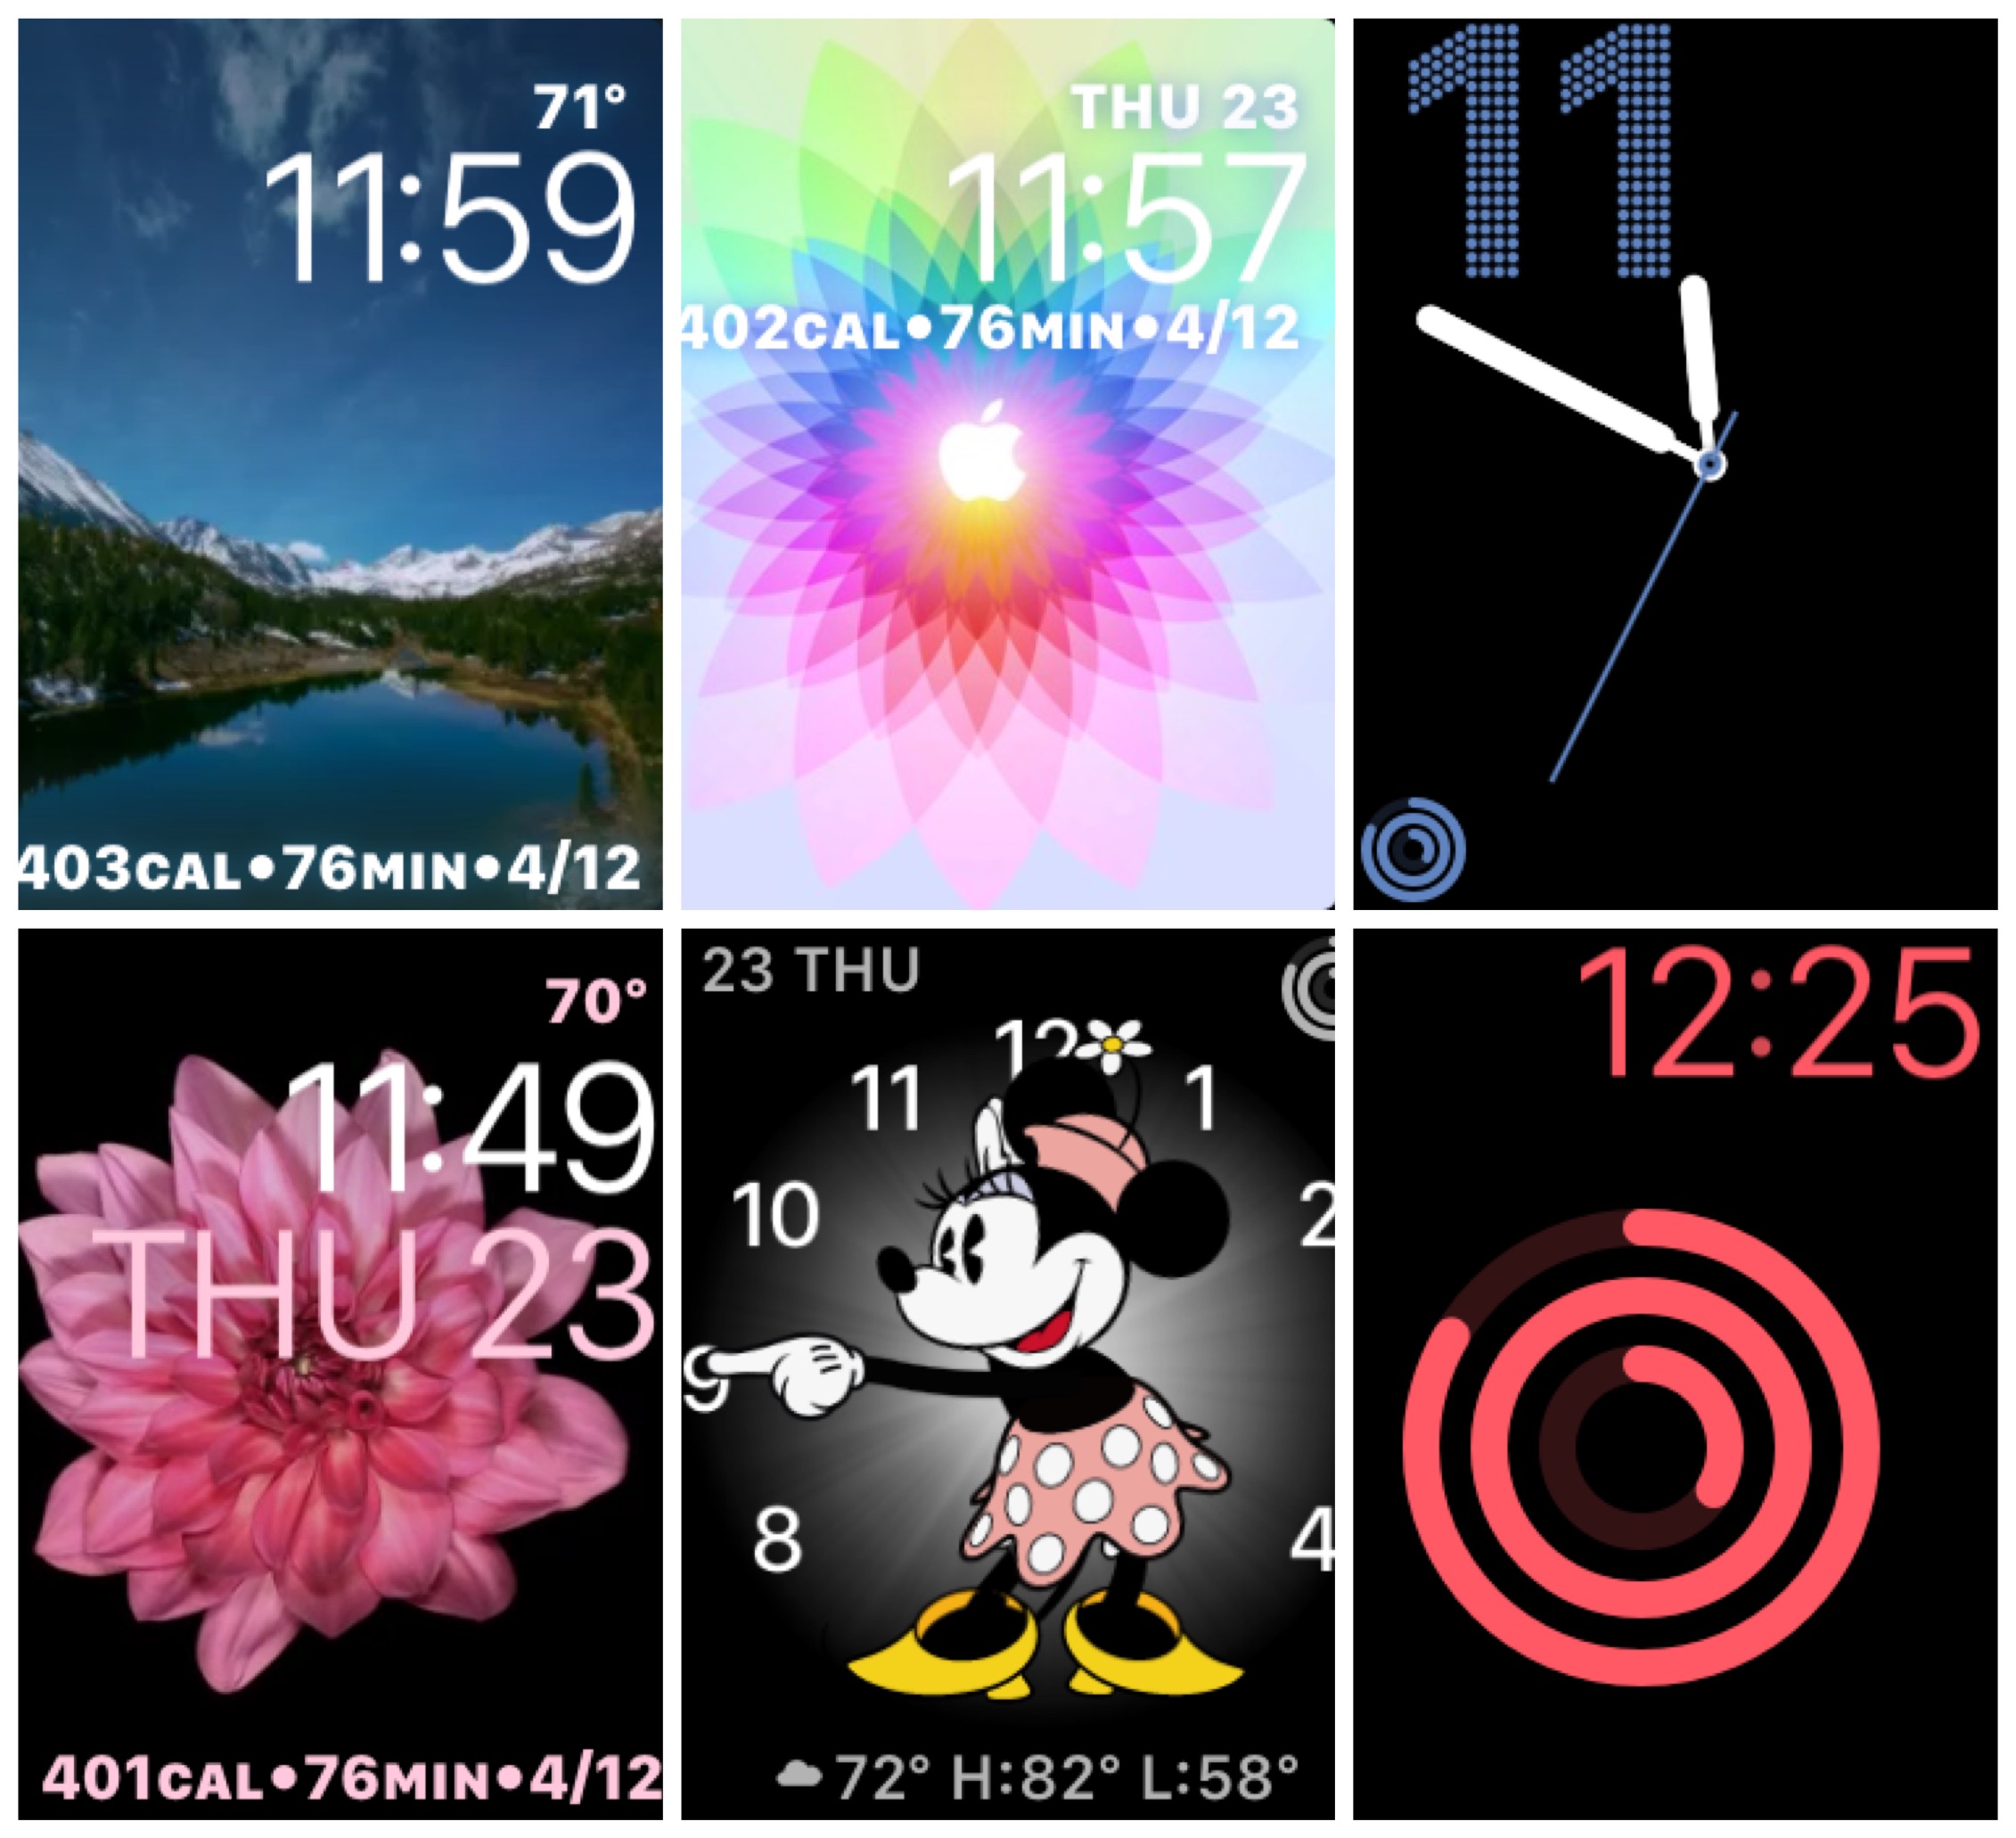 More Details About Apple Watch Faces in watchOS 3